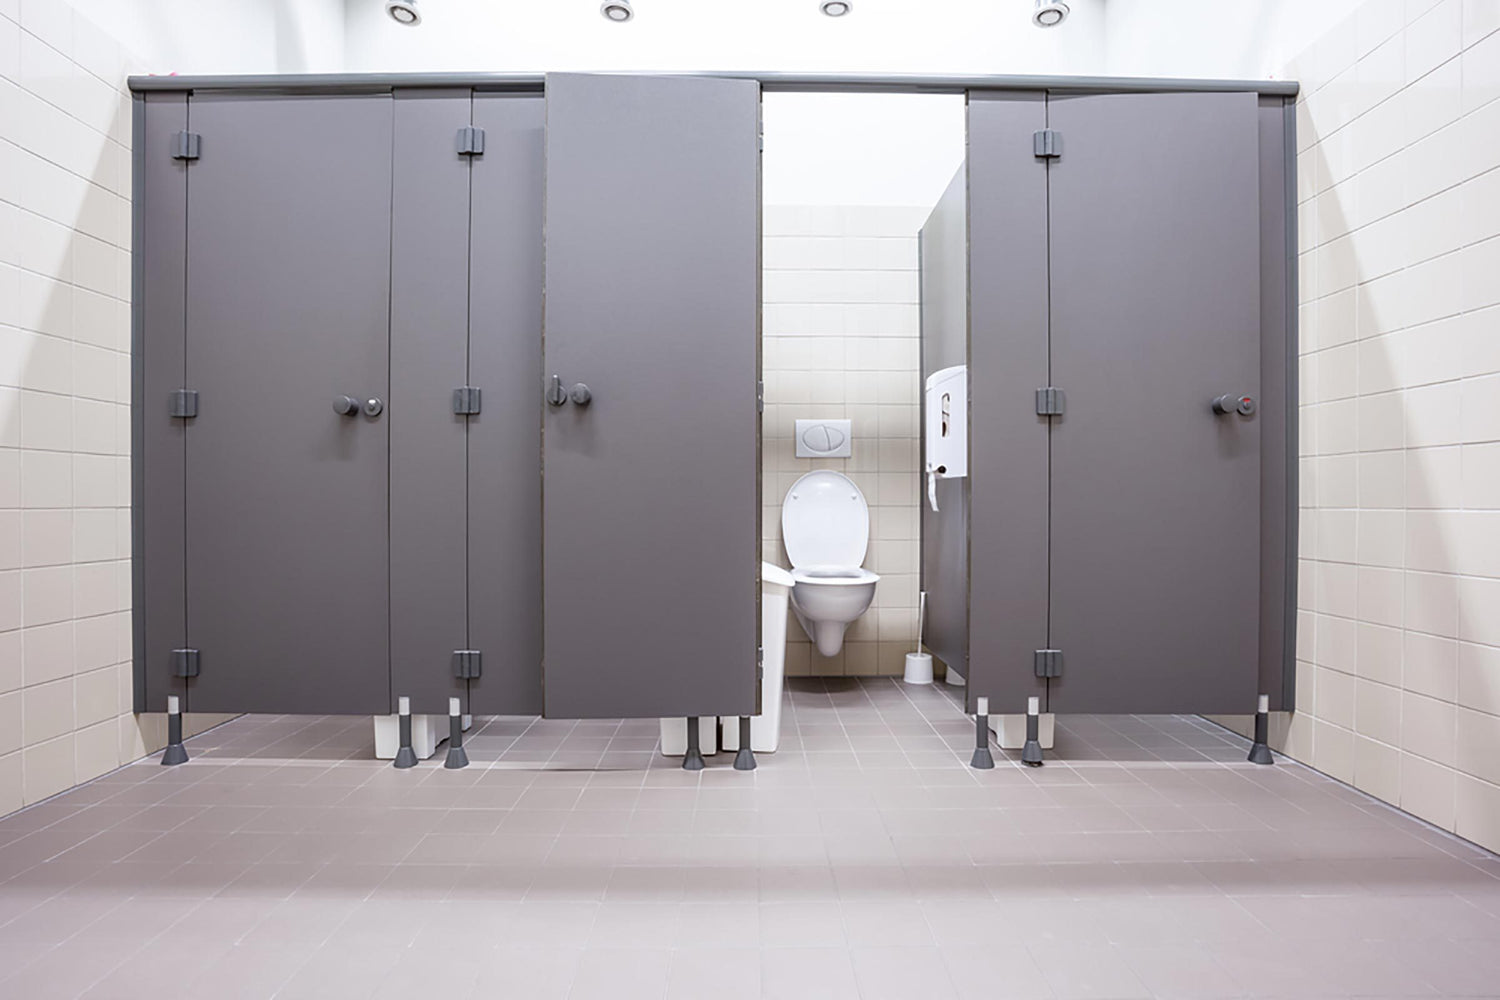 The Survival Guide for Pooping at Work Again